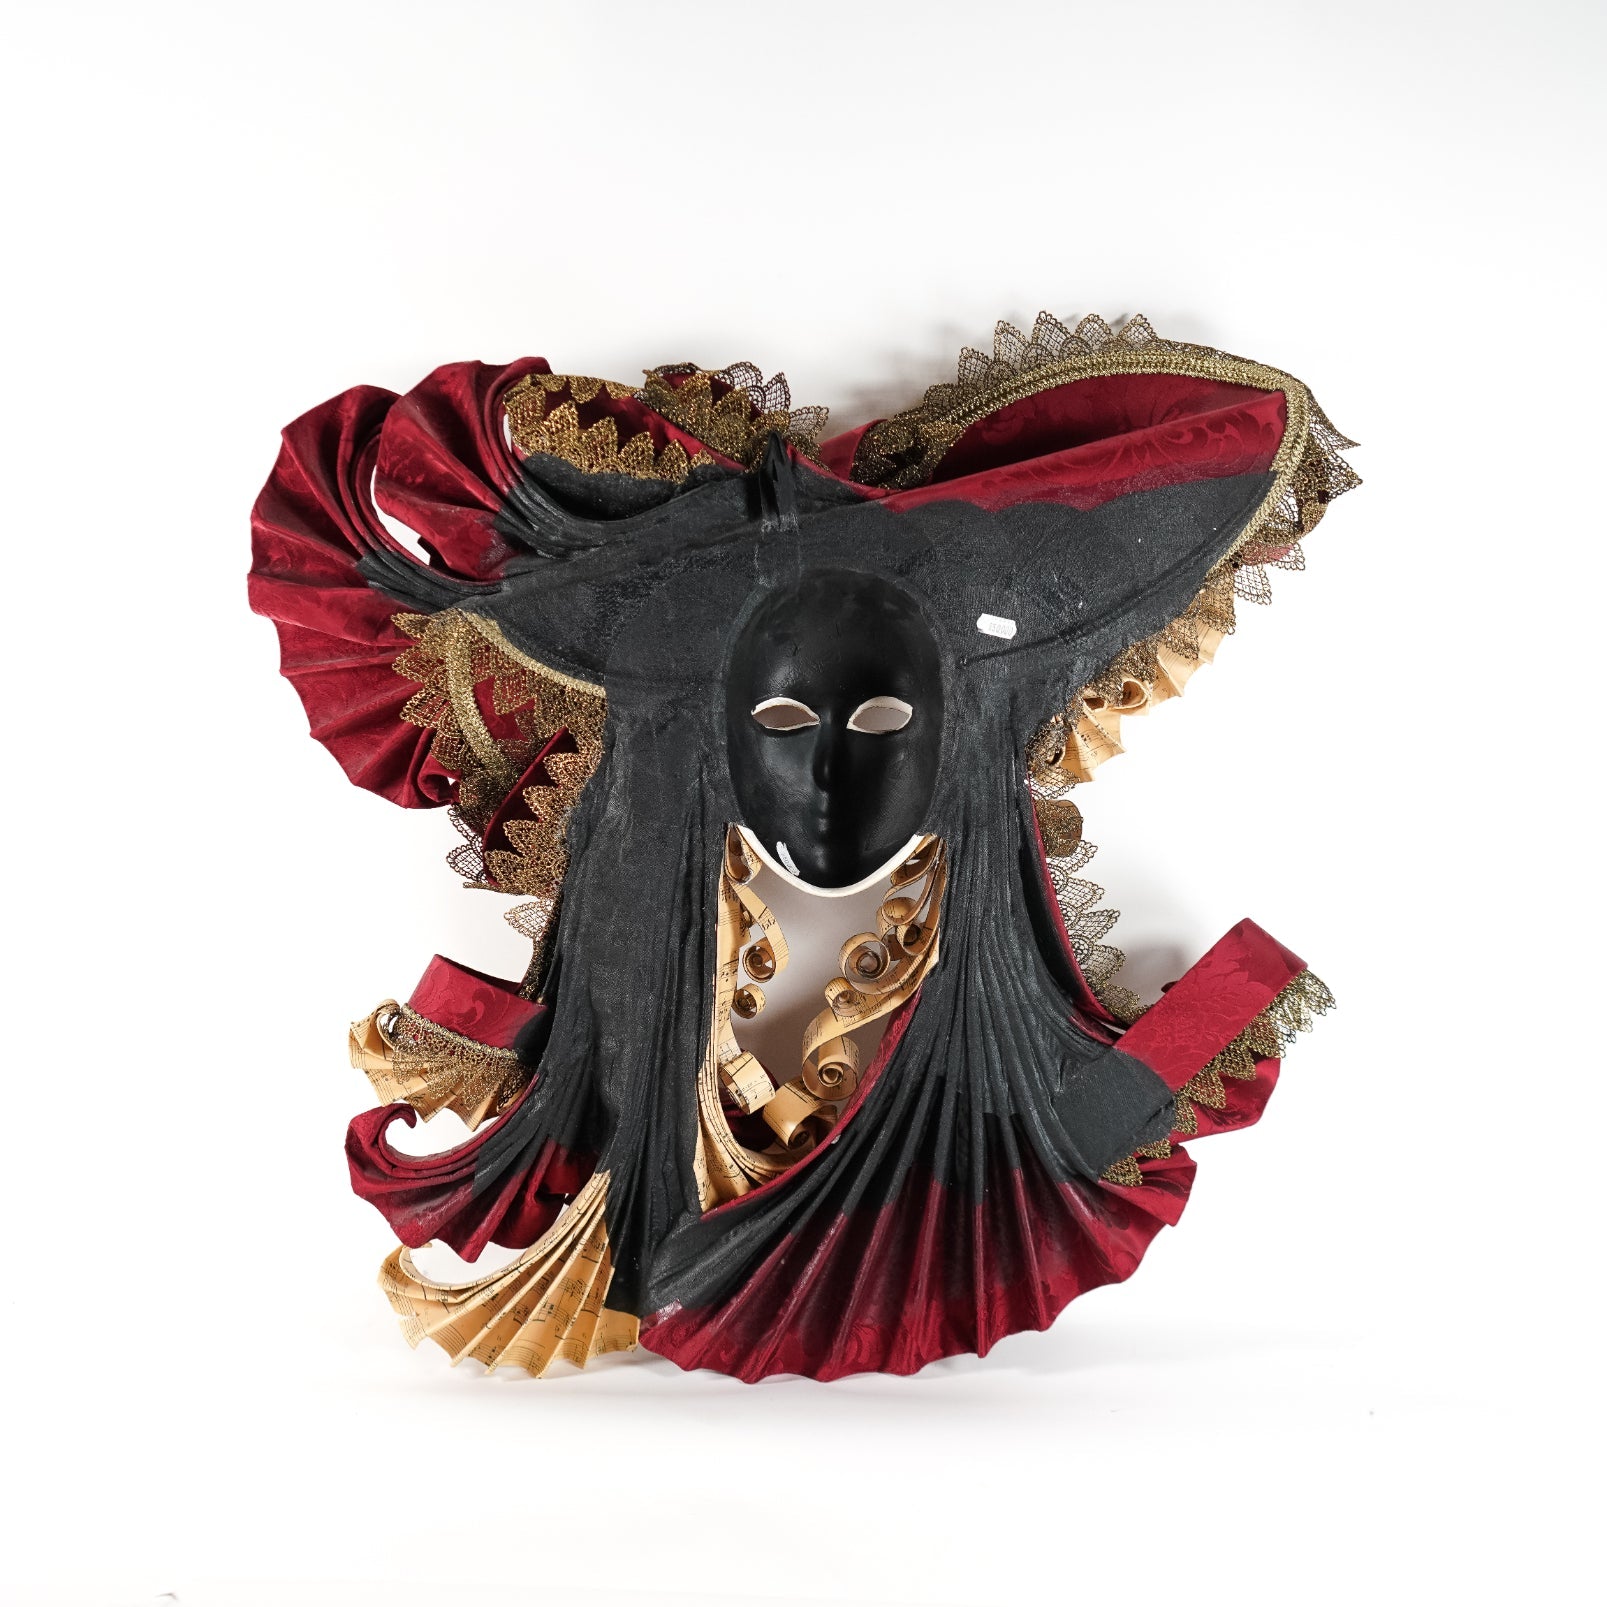 Vintage Venetian Mask Wall Mount - Sirdab - Unknown